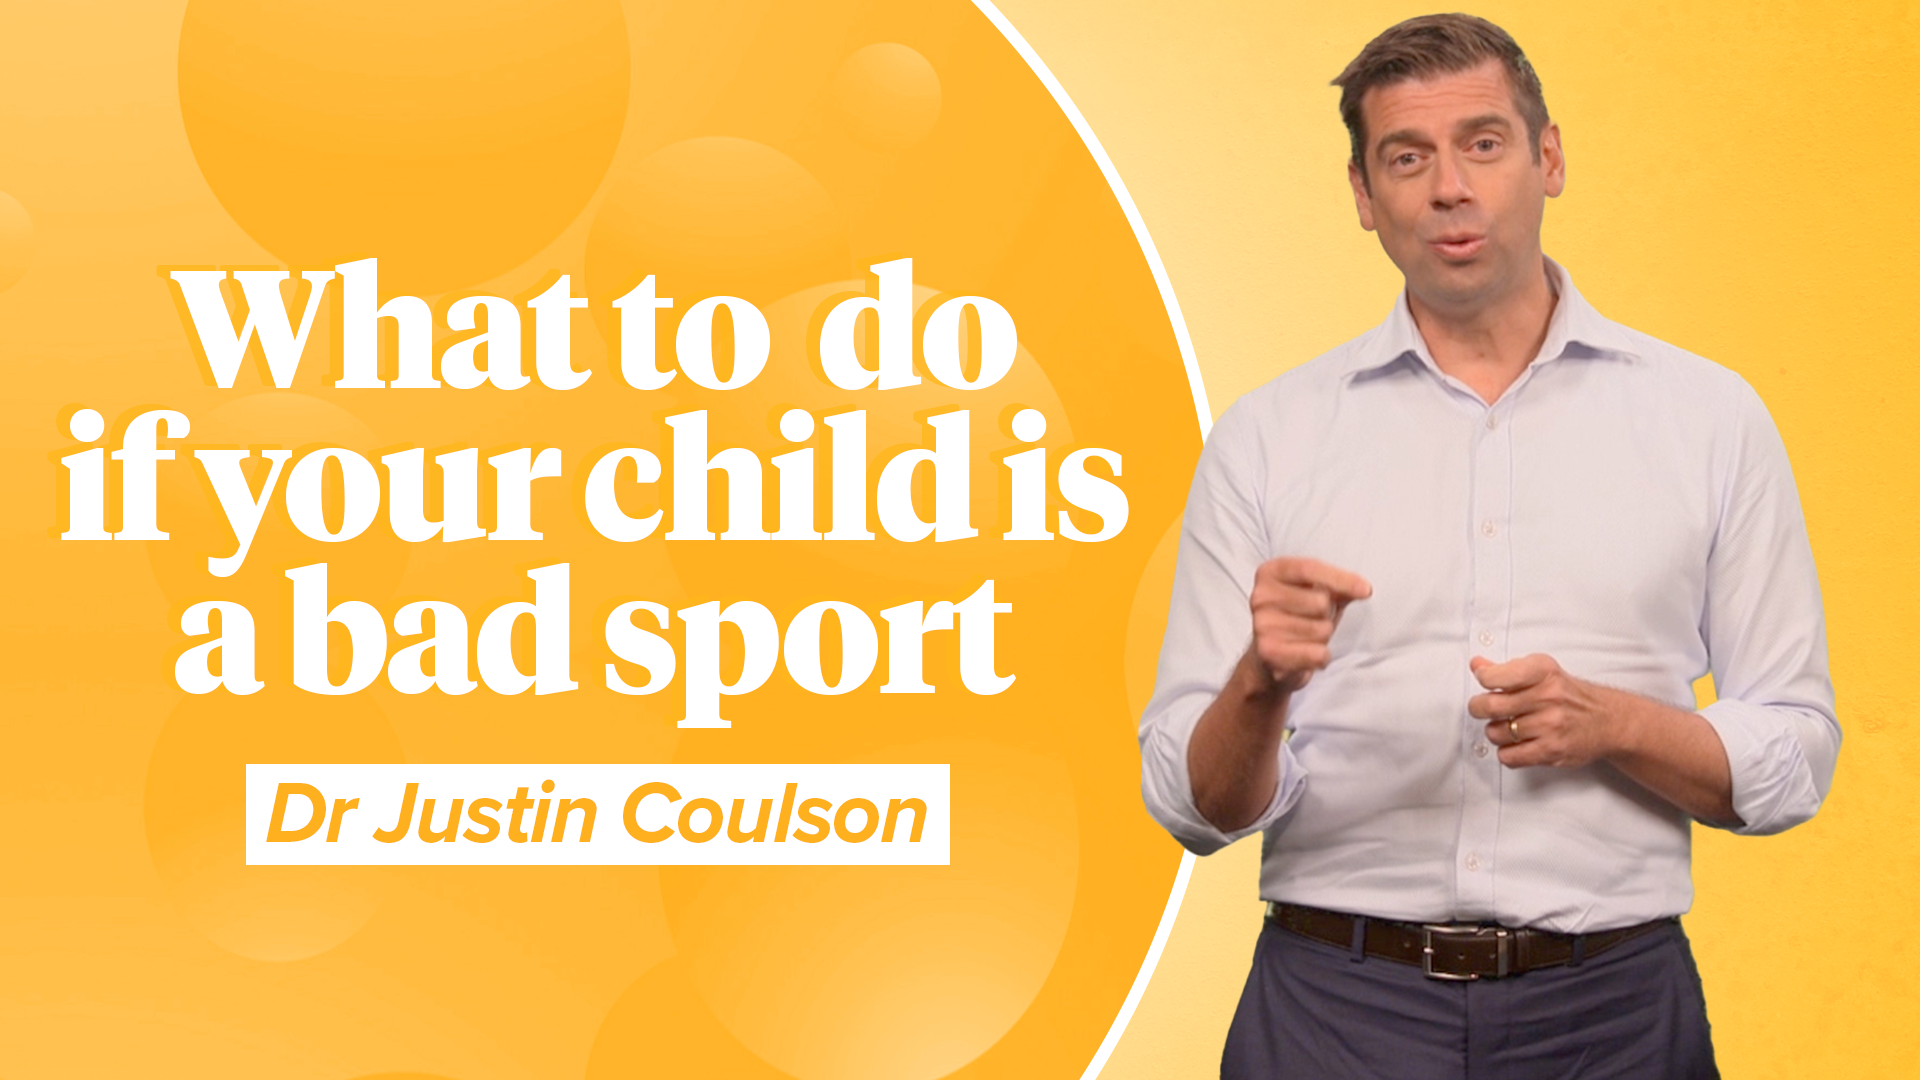 What to do if your child is a bad sport